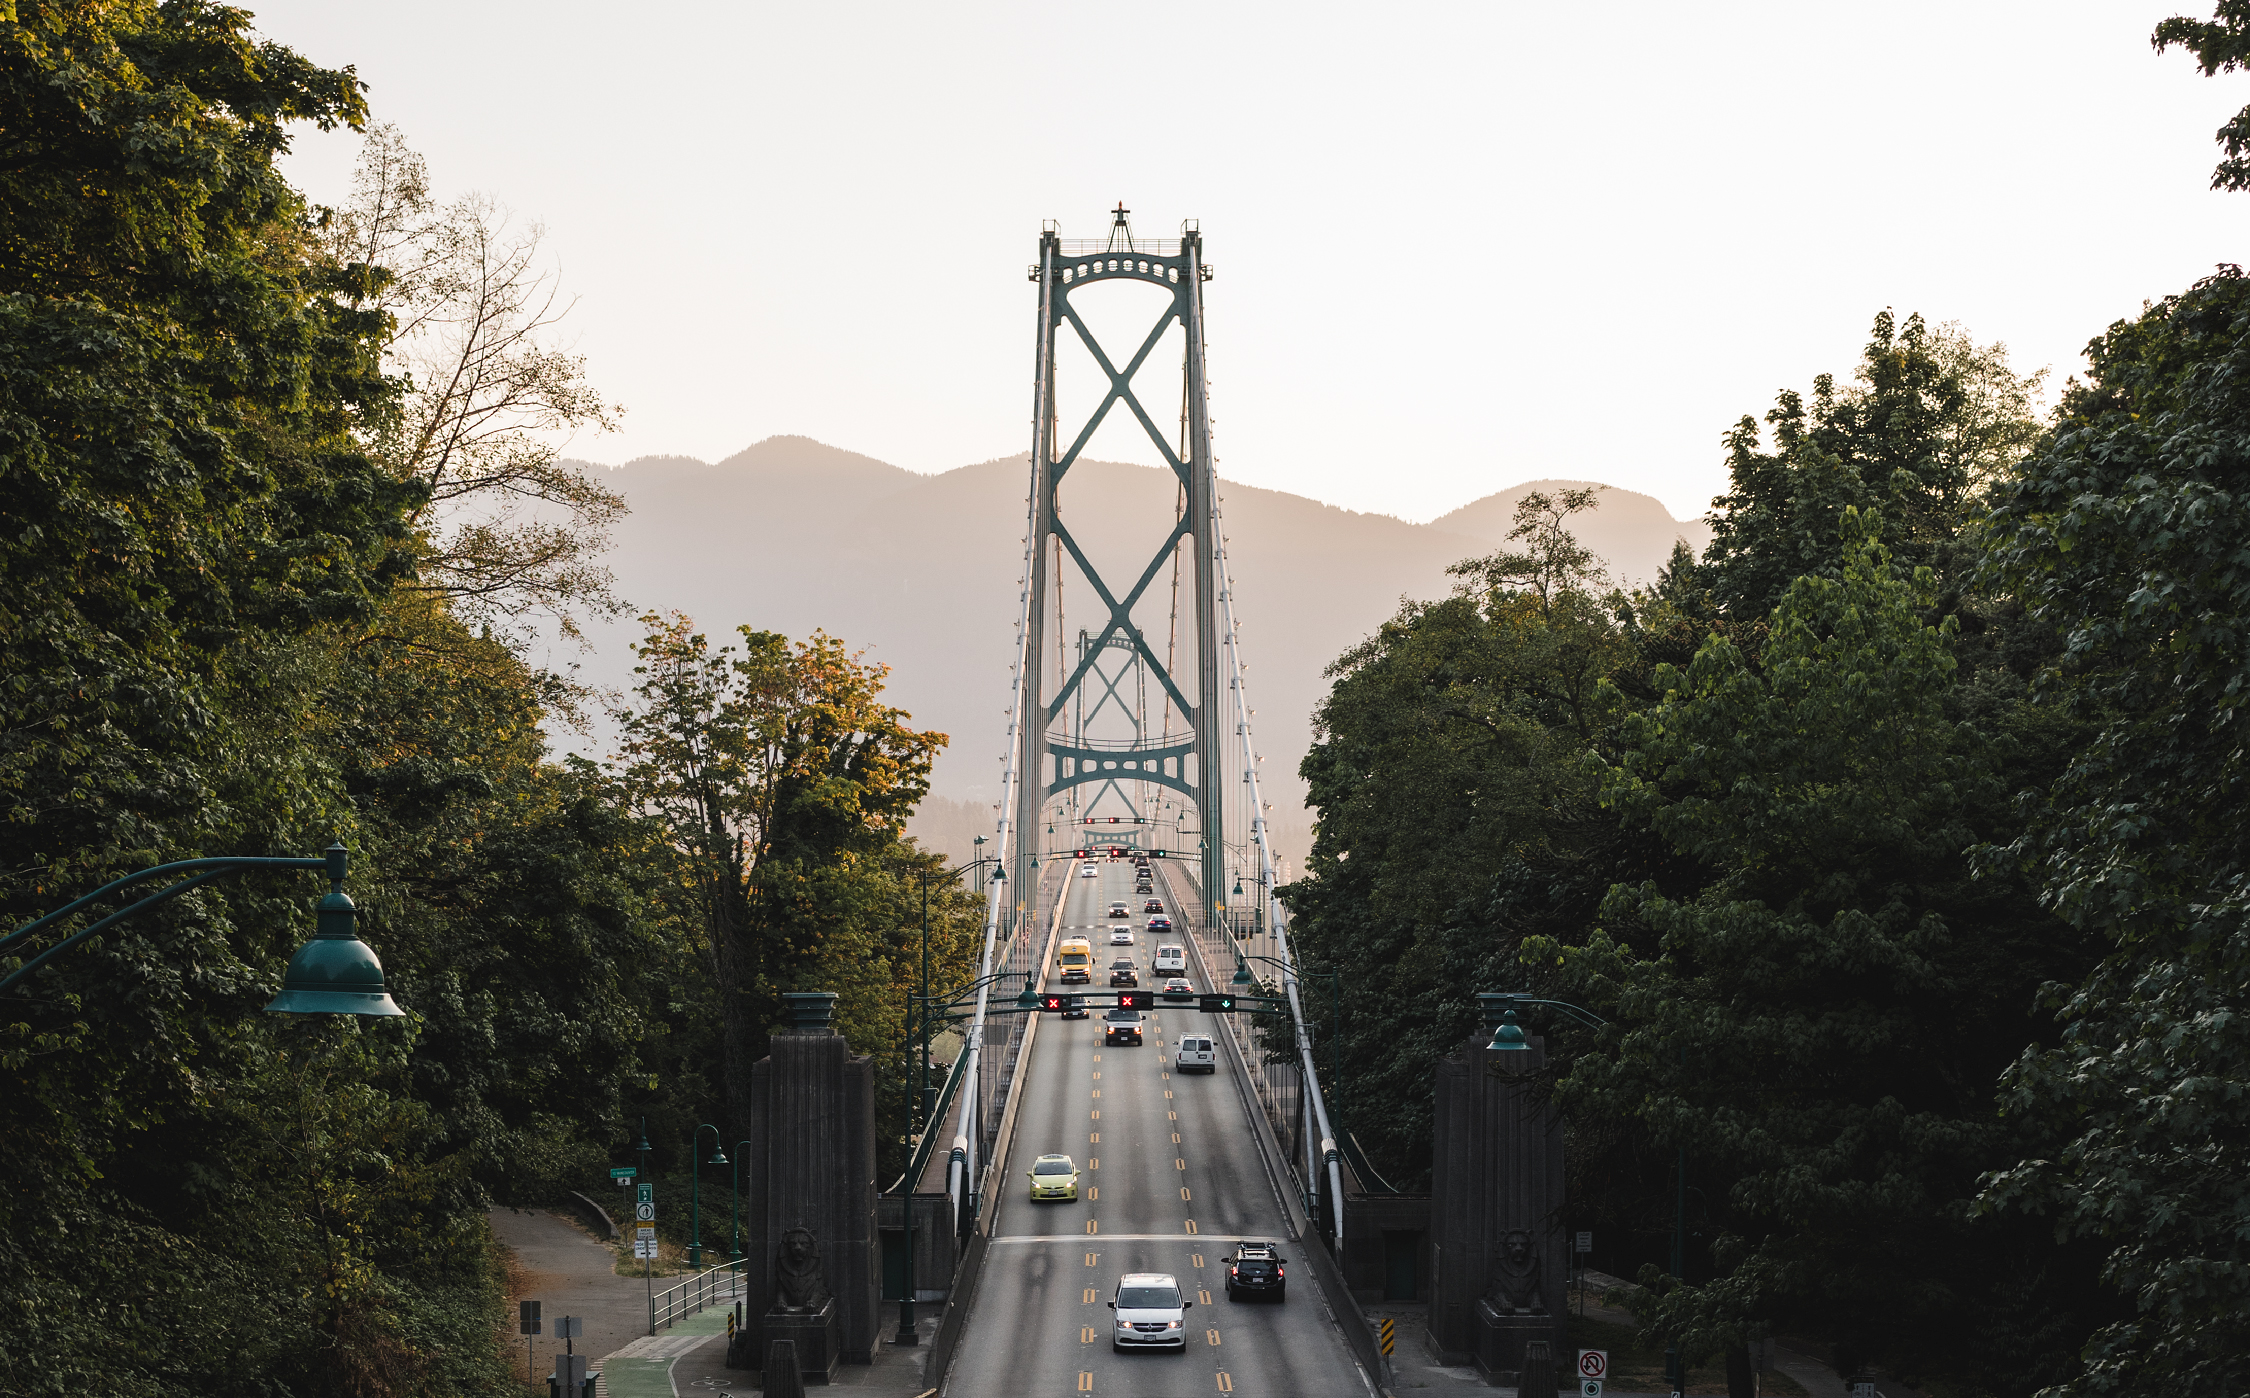 The Lion's Gate Bridge in Vancouver's Stanley Park at sunset. Cars make their way across the bridge. Large green trees surround the bridge on both sides and a glimpse of the north shore mountains are in the background.